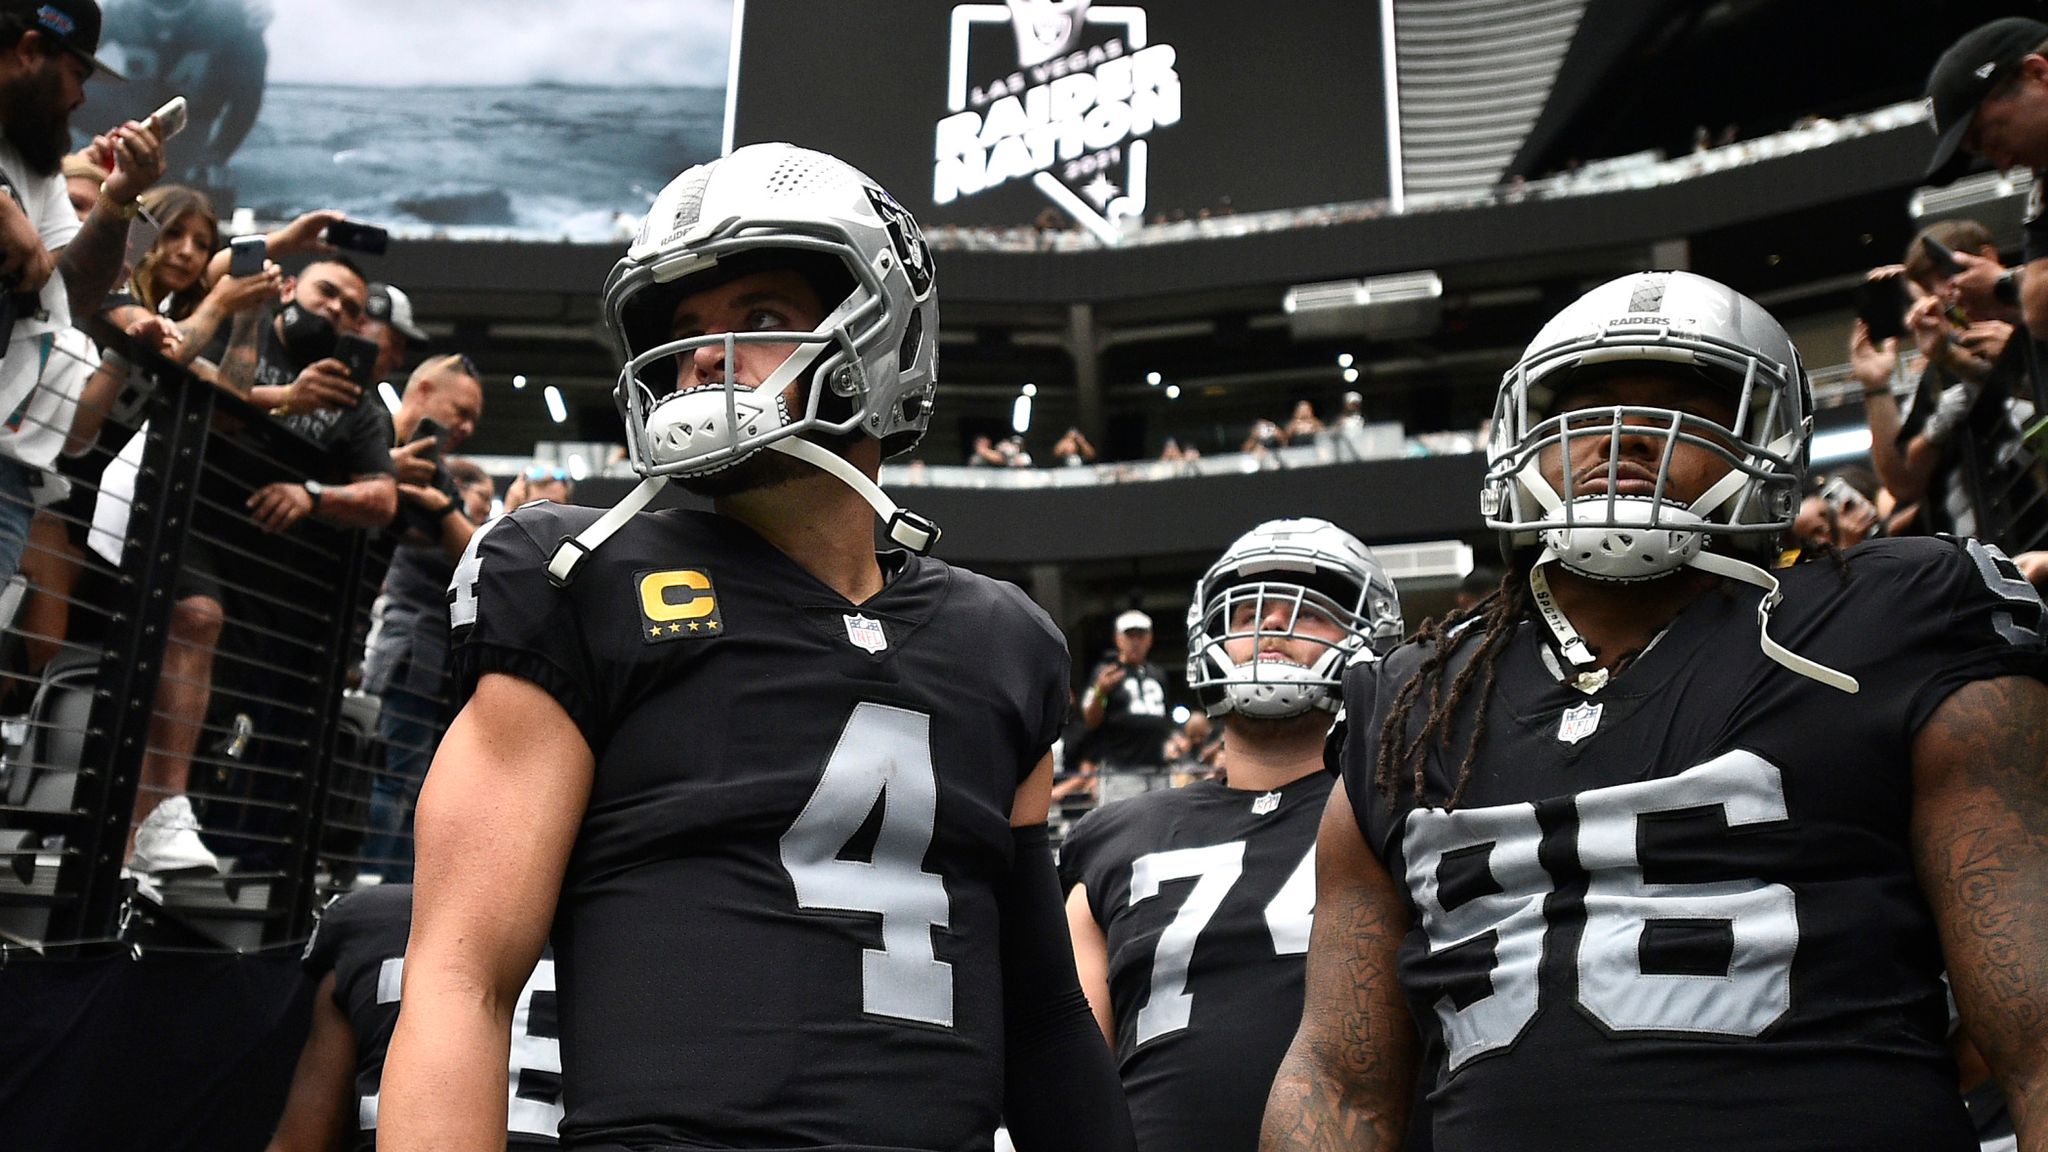 watch raiders game live now